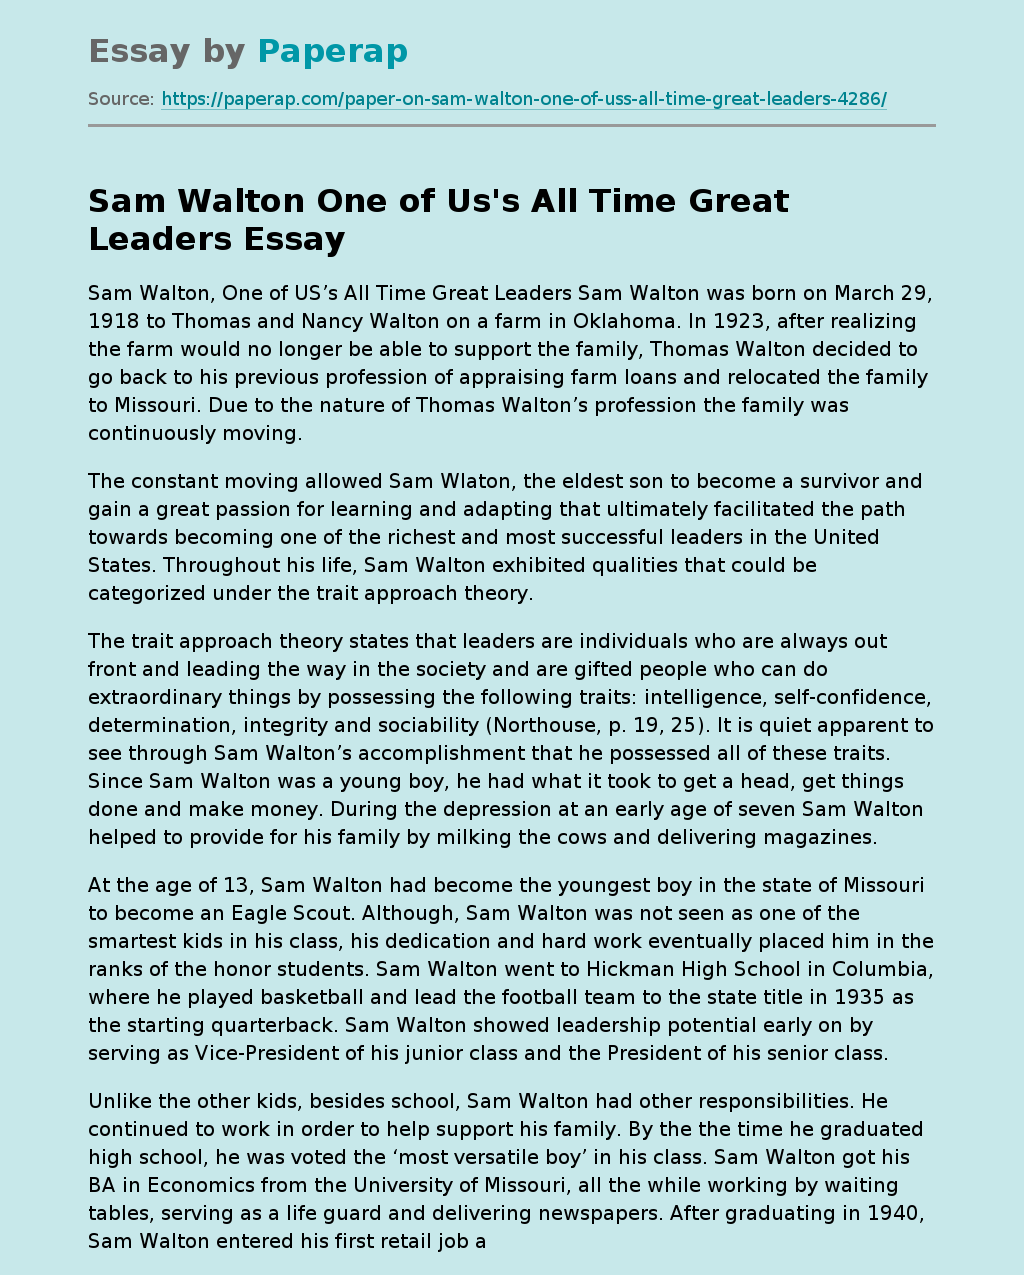 Sam Walton One of Us's All Time Great Leaders